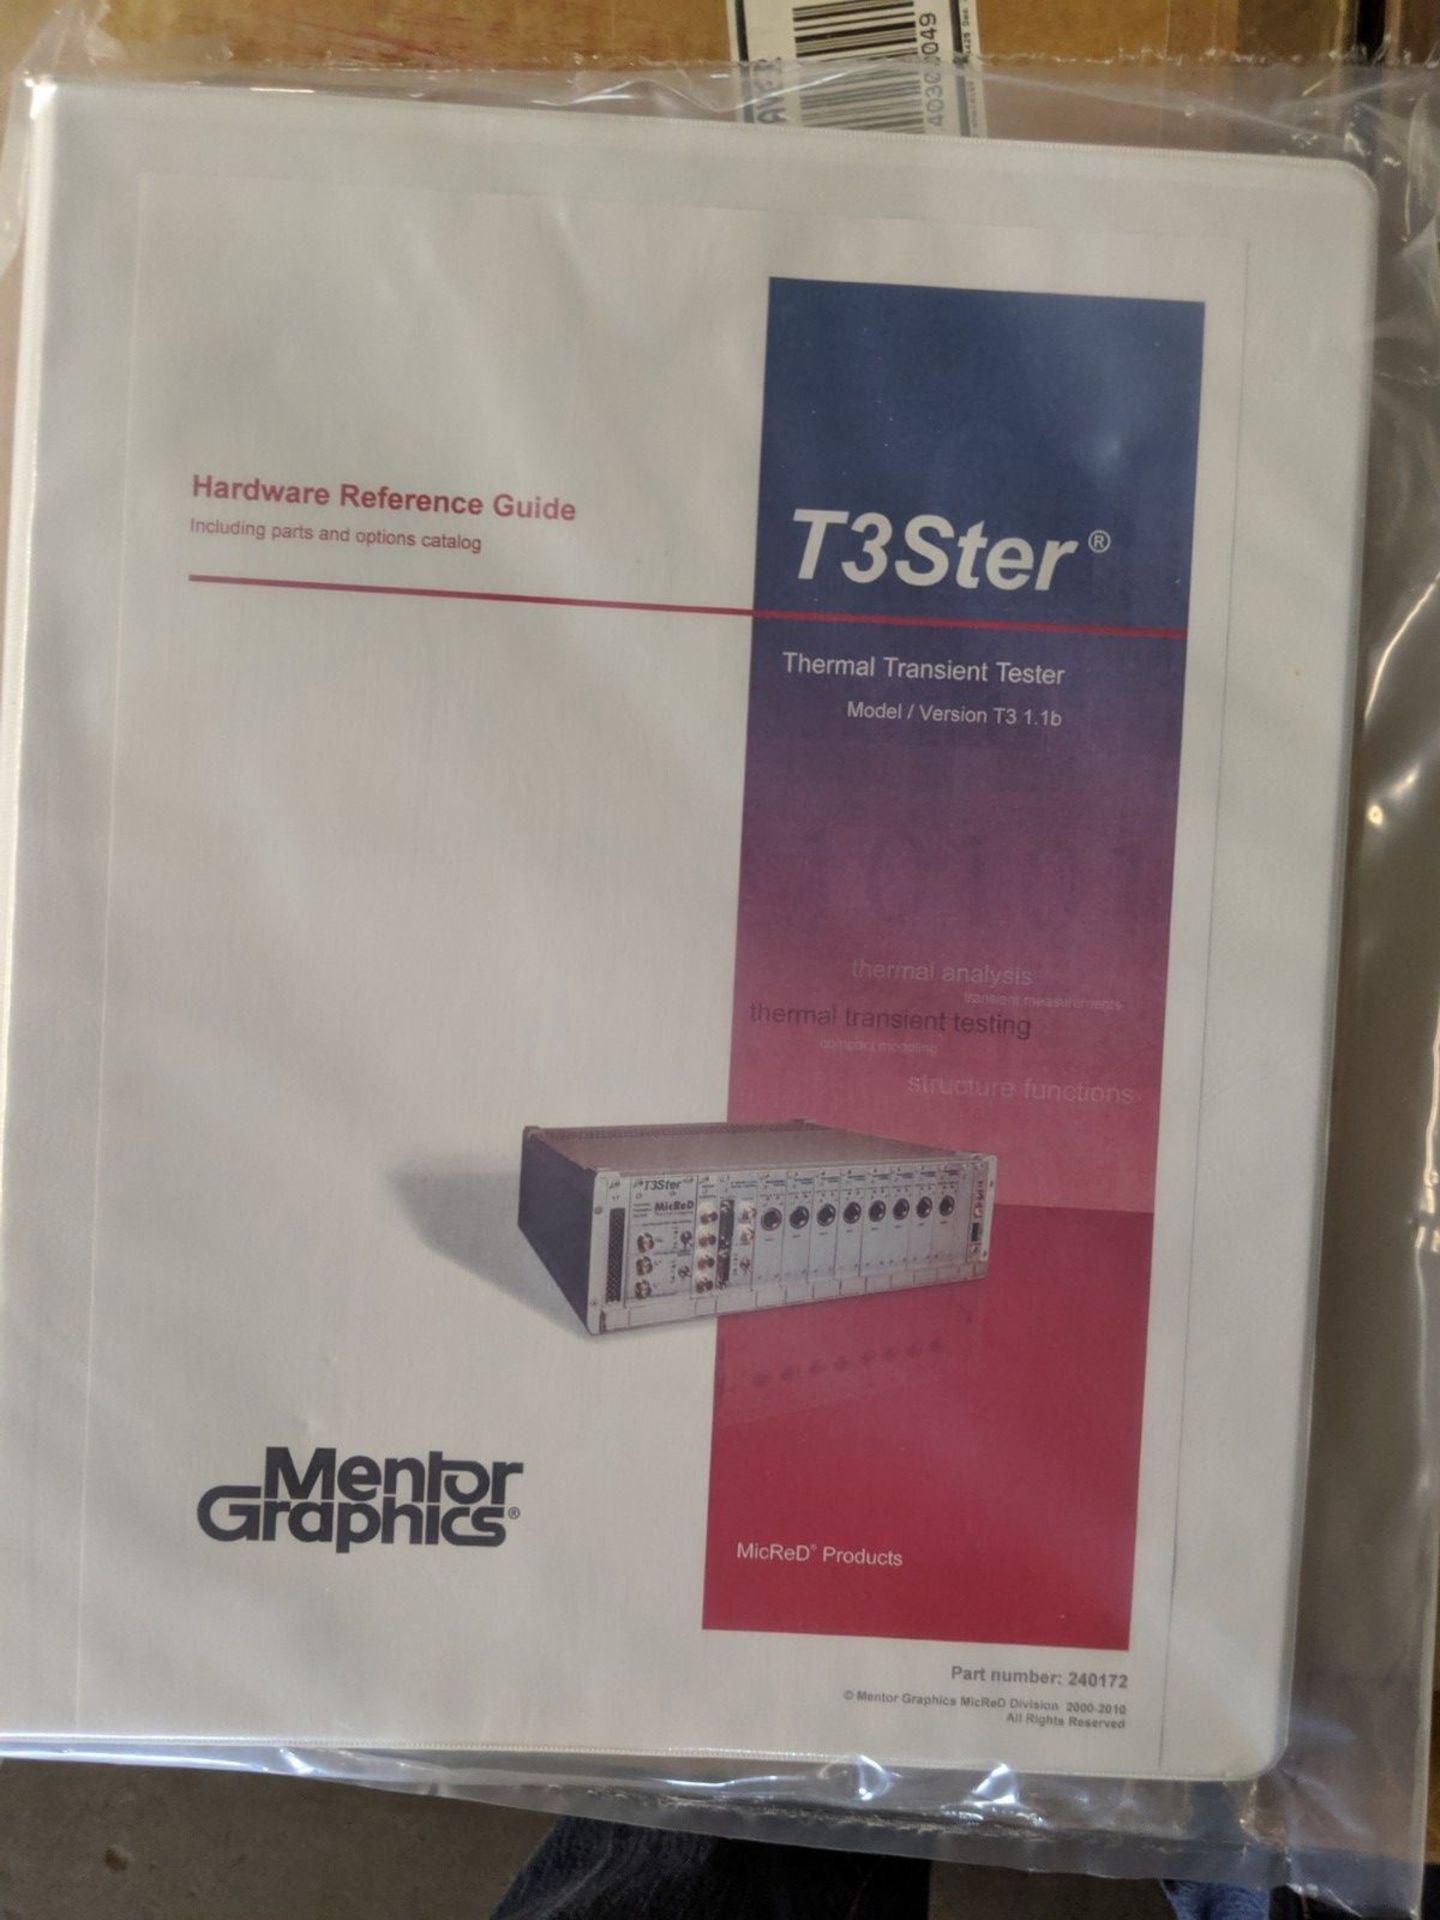 MENTOR THERMAL TRANSIENT TESTER, M/N T2STER2000/100, S/N 0333, WITH MENTOR GRAPHICS MODEL 2008/ HP - Image 7 of 11